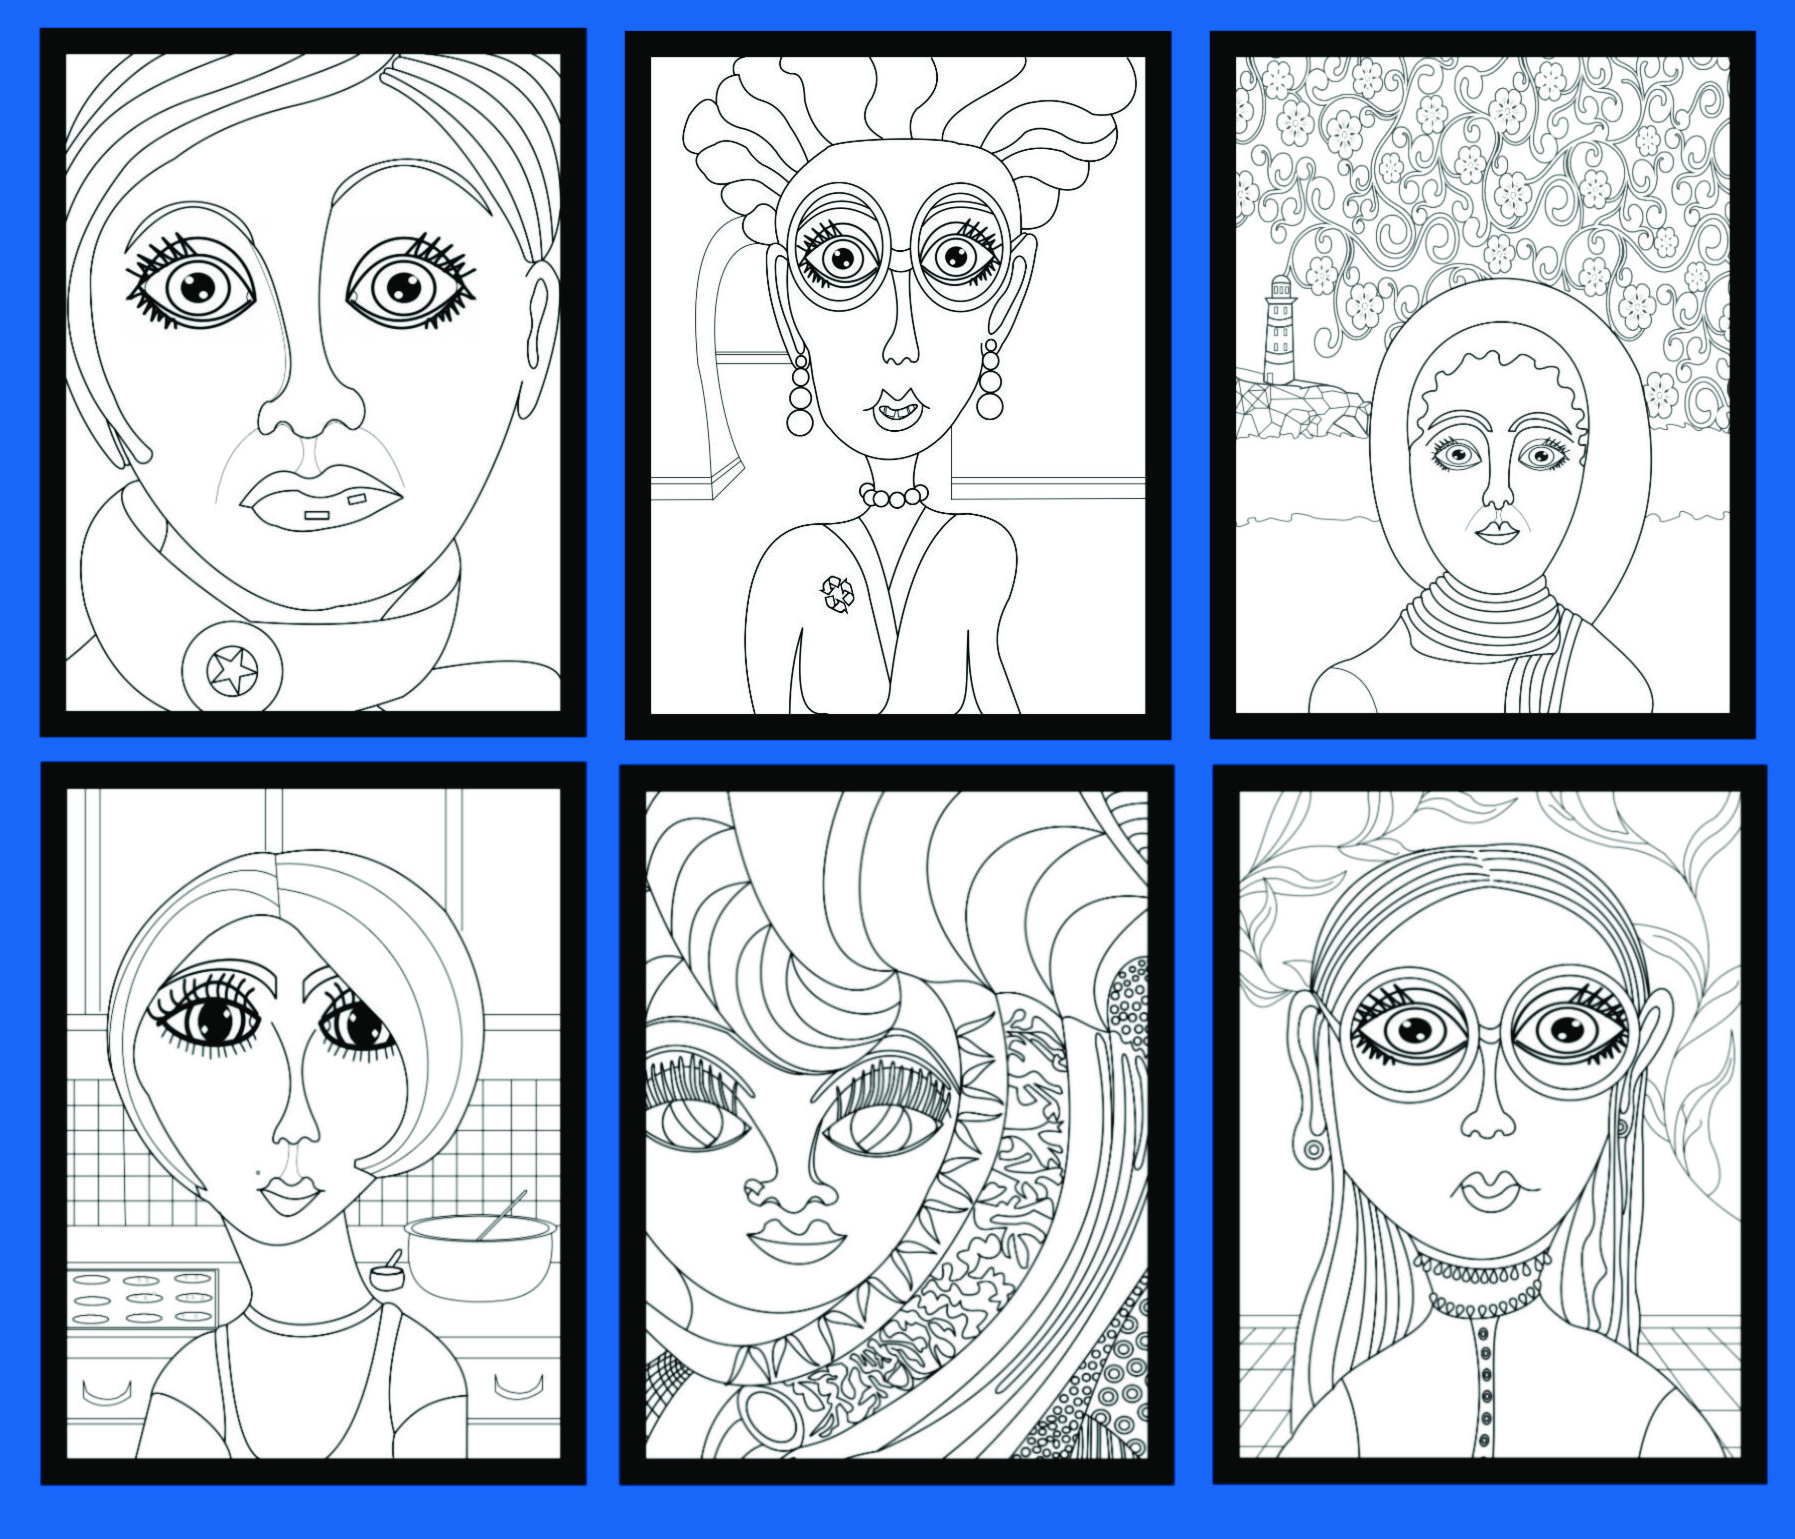 Faces Coloring Book by Audrey Breed sample pages.